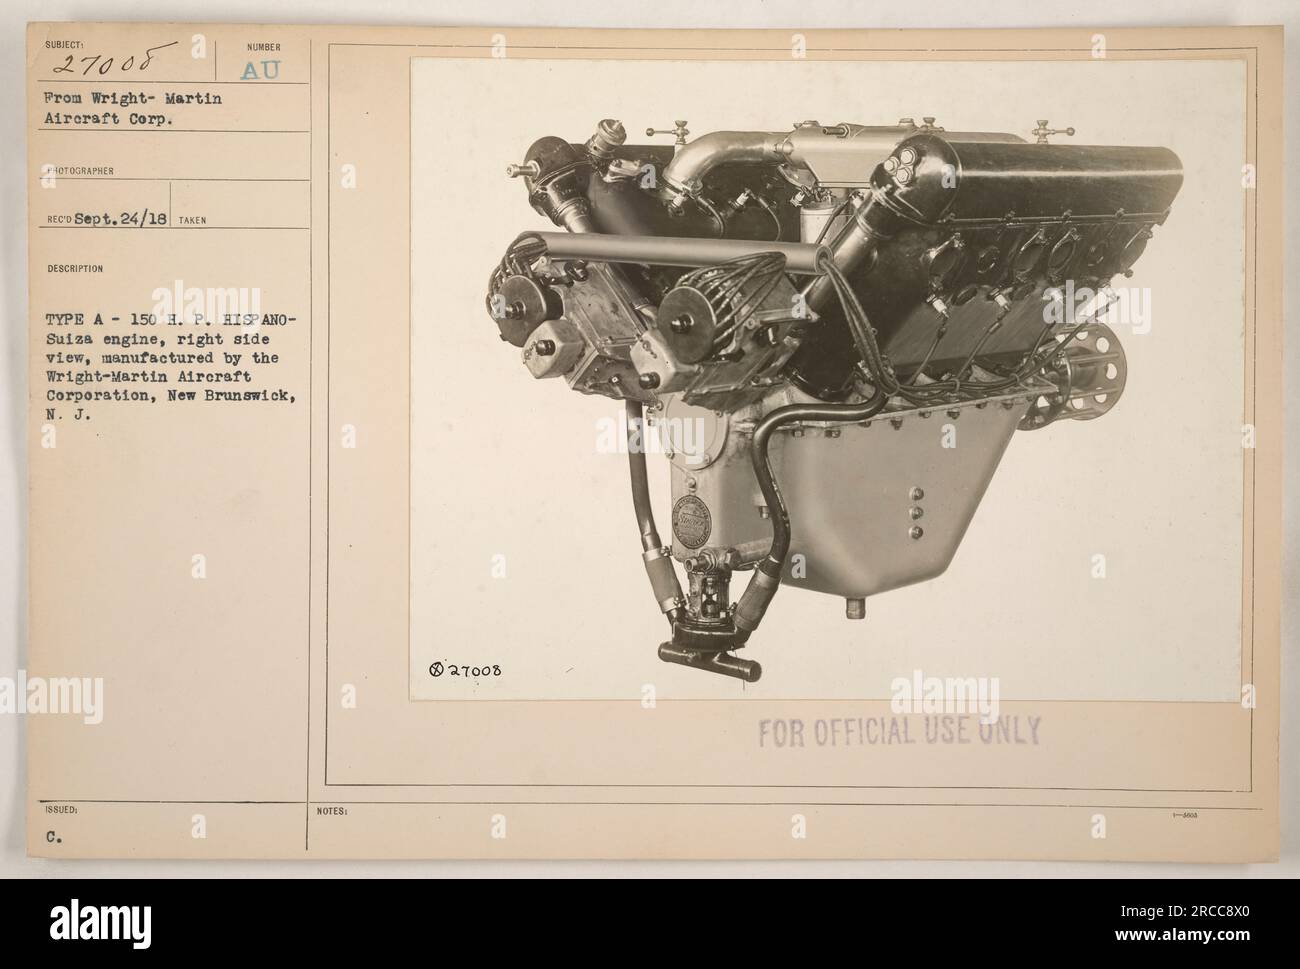 A 150 horsepower HISPANO-Suiza engine, as seen from the right side, manufactured by the Wright-Martin Aircraft Corporation in New Brunswick, New Jersey. This photograph was taken on September 24, 1918, and was assigned the identification number 111-SC-27008. The image is restricted for official use only. Stock Photo